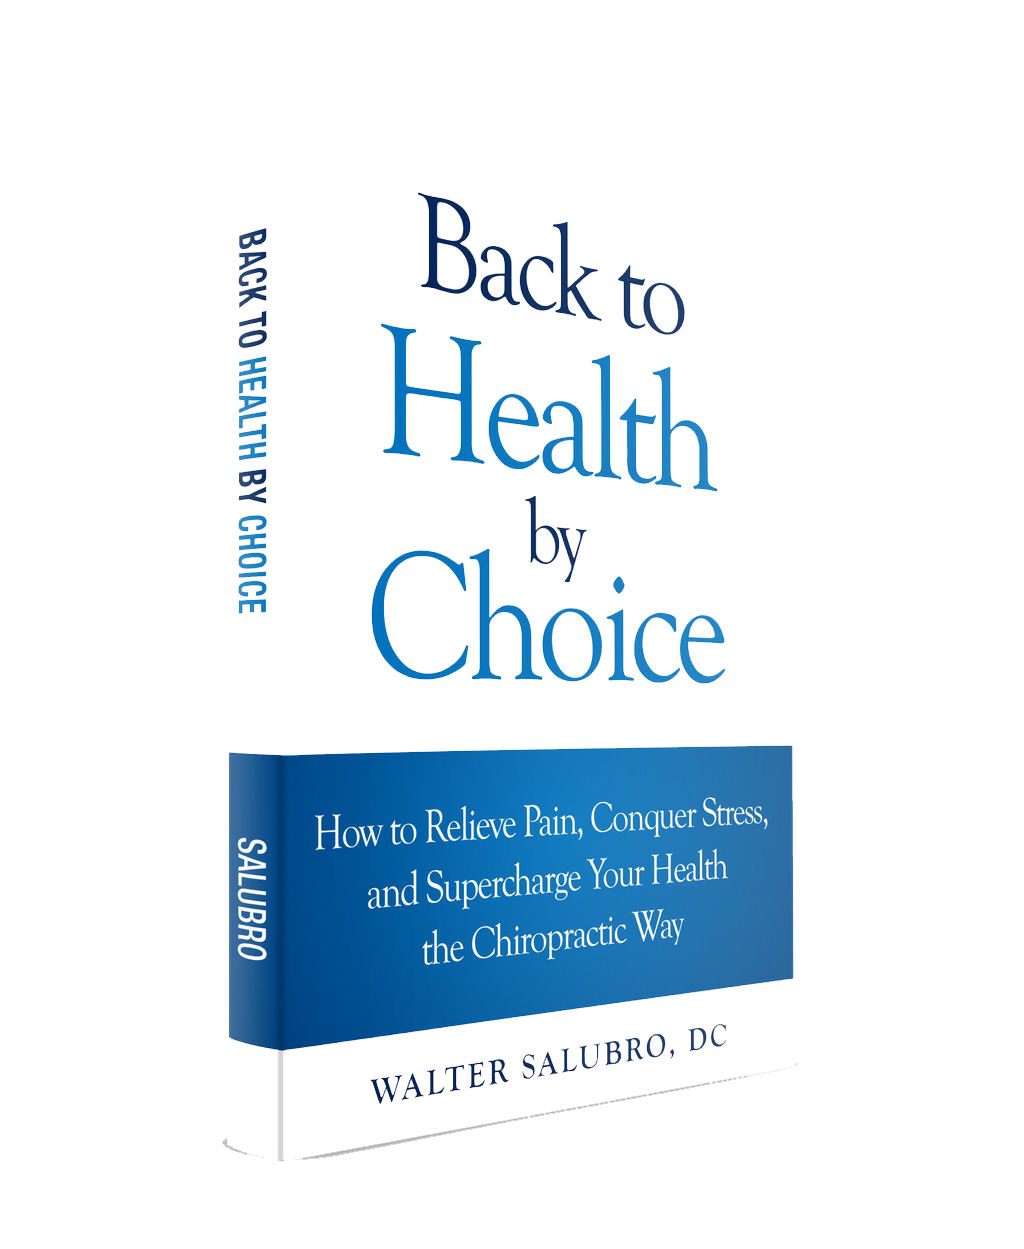 Dr. Walter's New Book